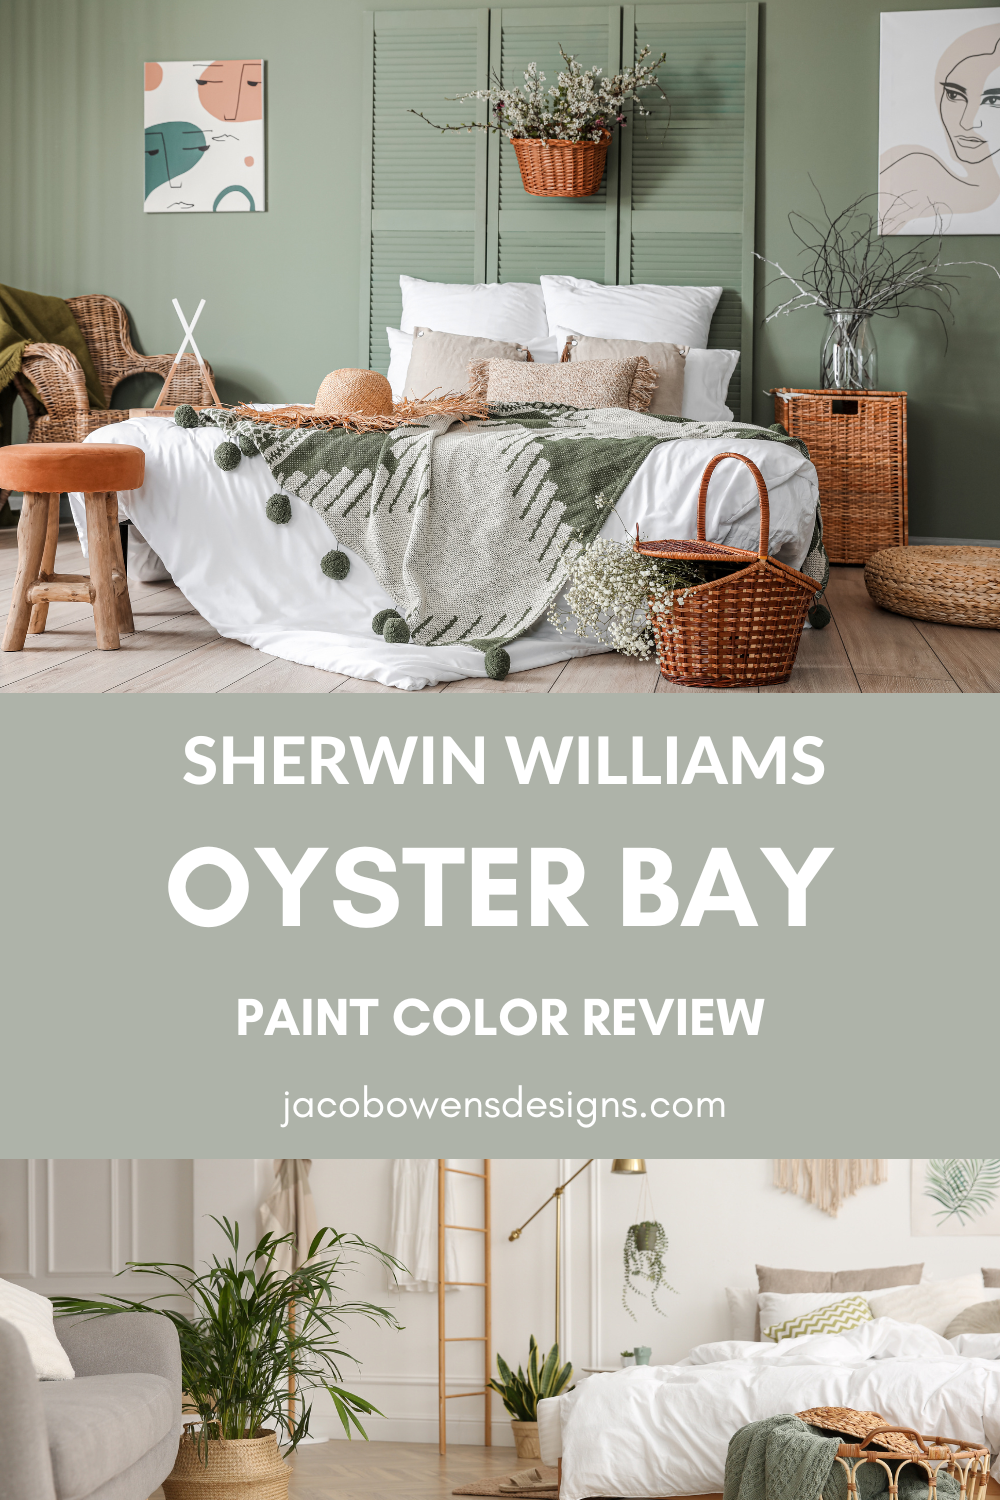 Sherwin Williams Oyster Bay Paint Color Review